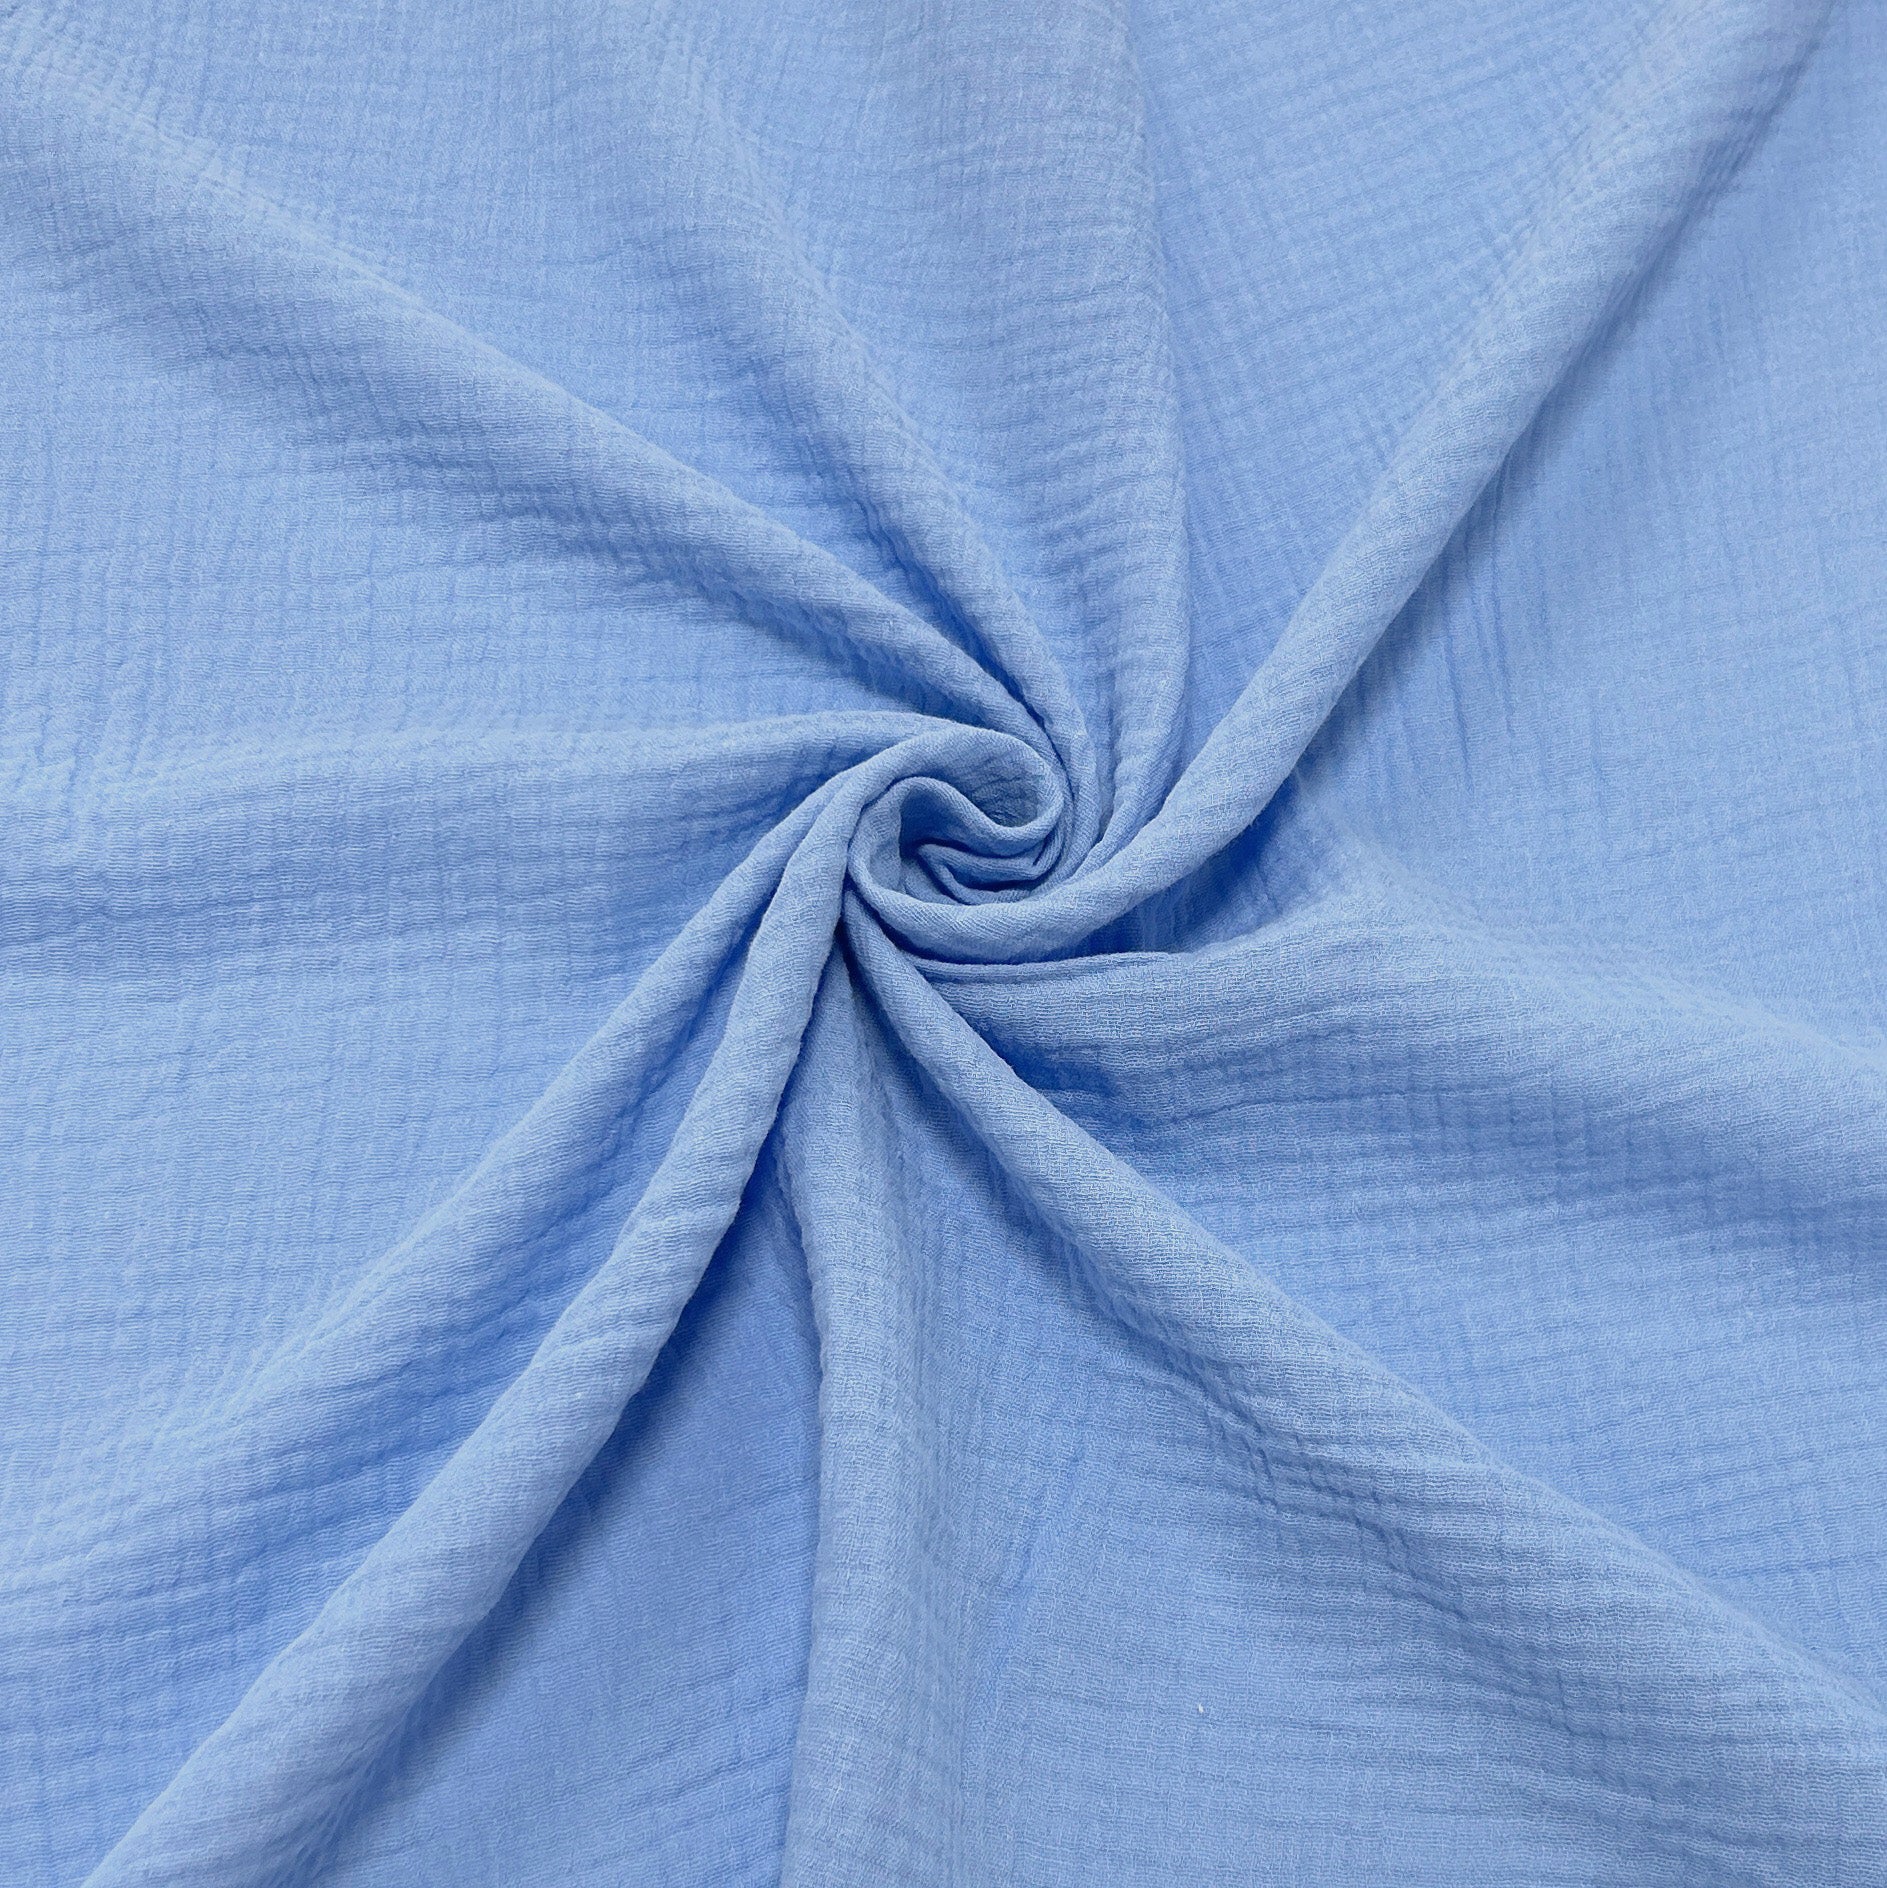 Periwinkle Woven Cotton Light Weight Double Gauze Fabric